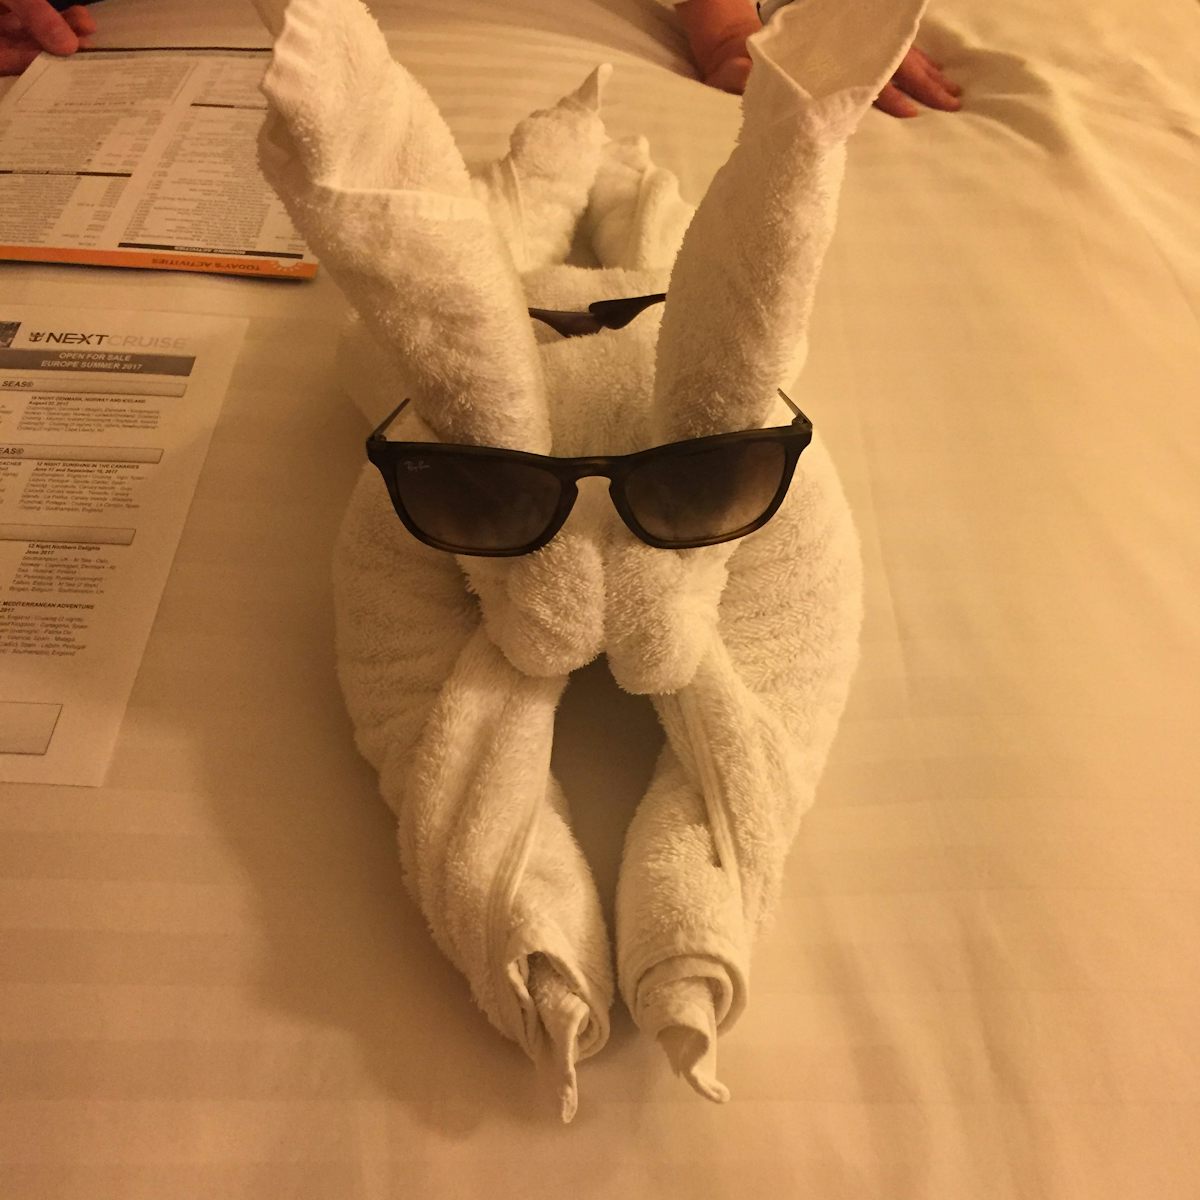 Cute towel animals left on our bed everyday!